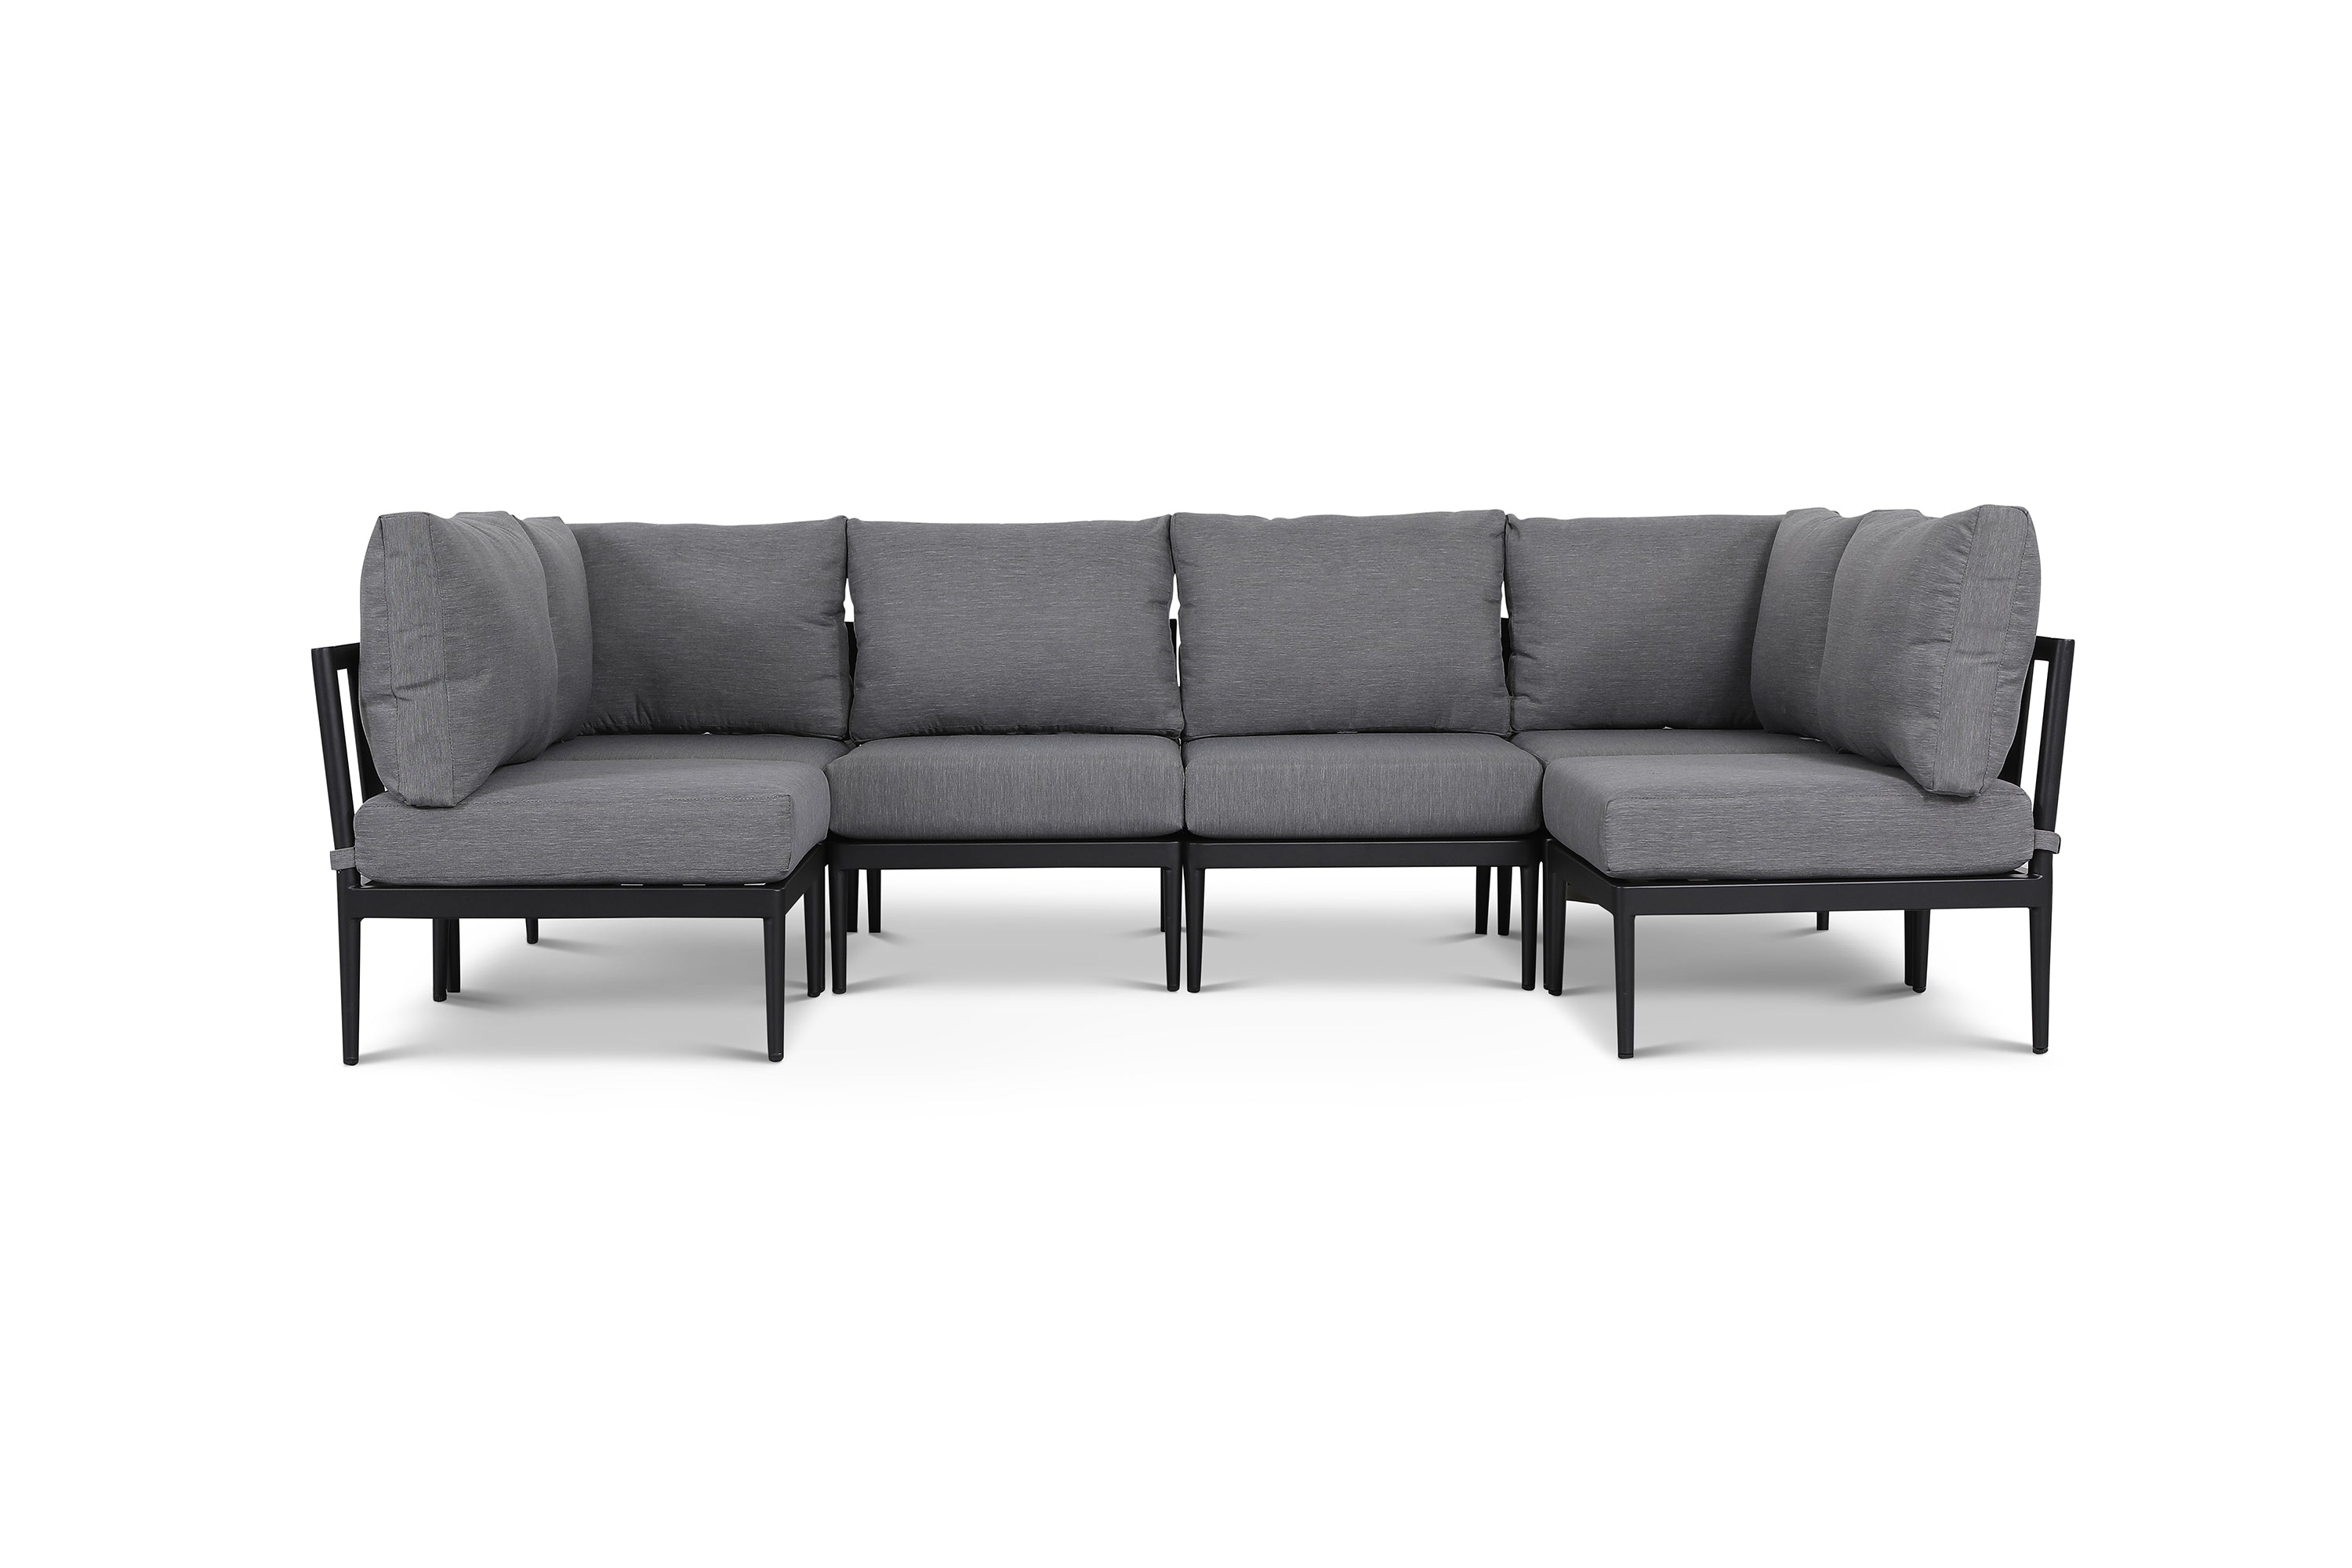 Parker 6 Piece Outdoor Armless Sectional